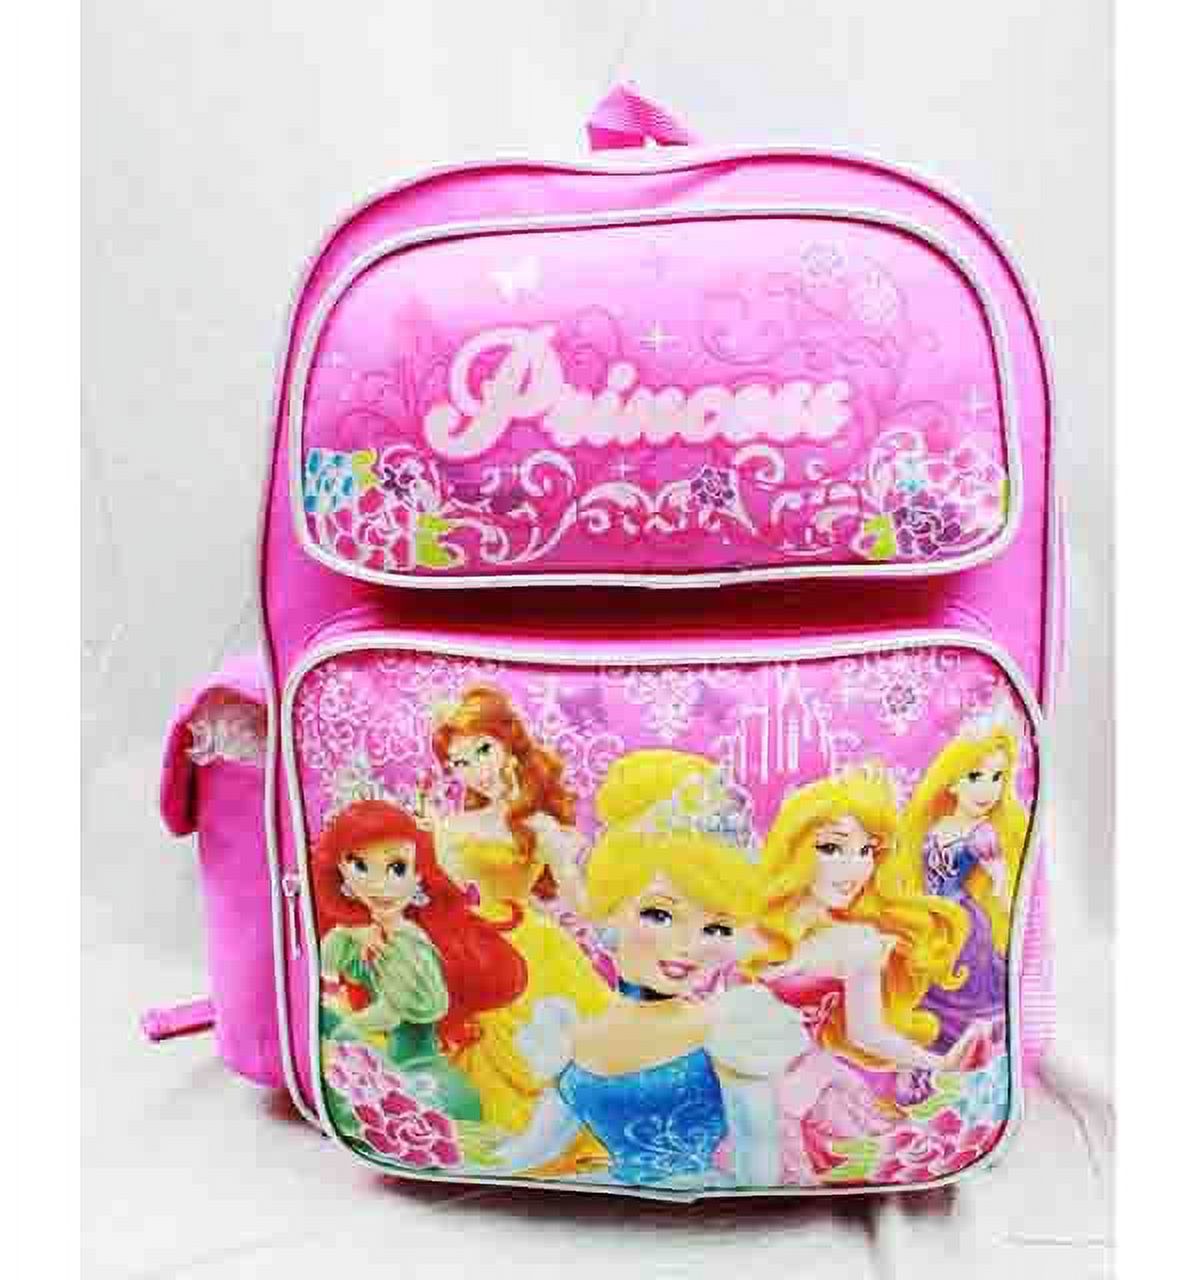 Backpack - - Princess w/ Flowers Pink Large Girls School Bag New a03888 - image 1 of 3